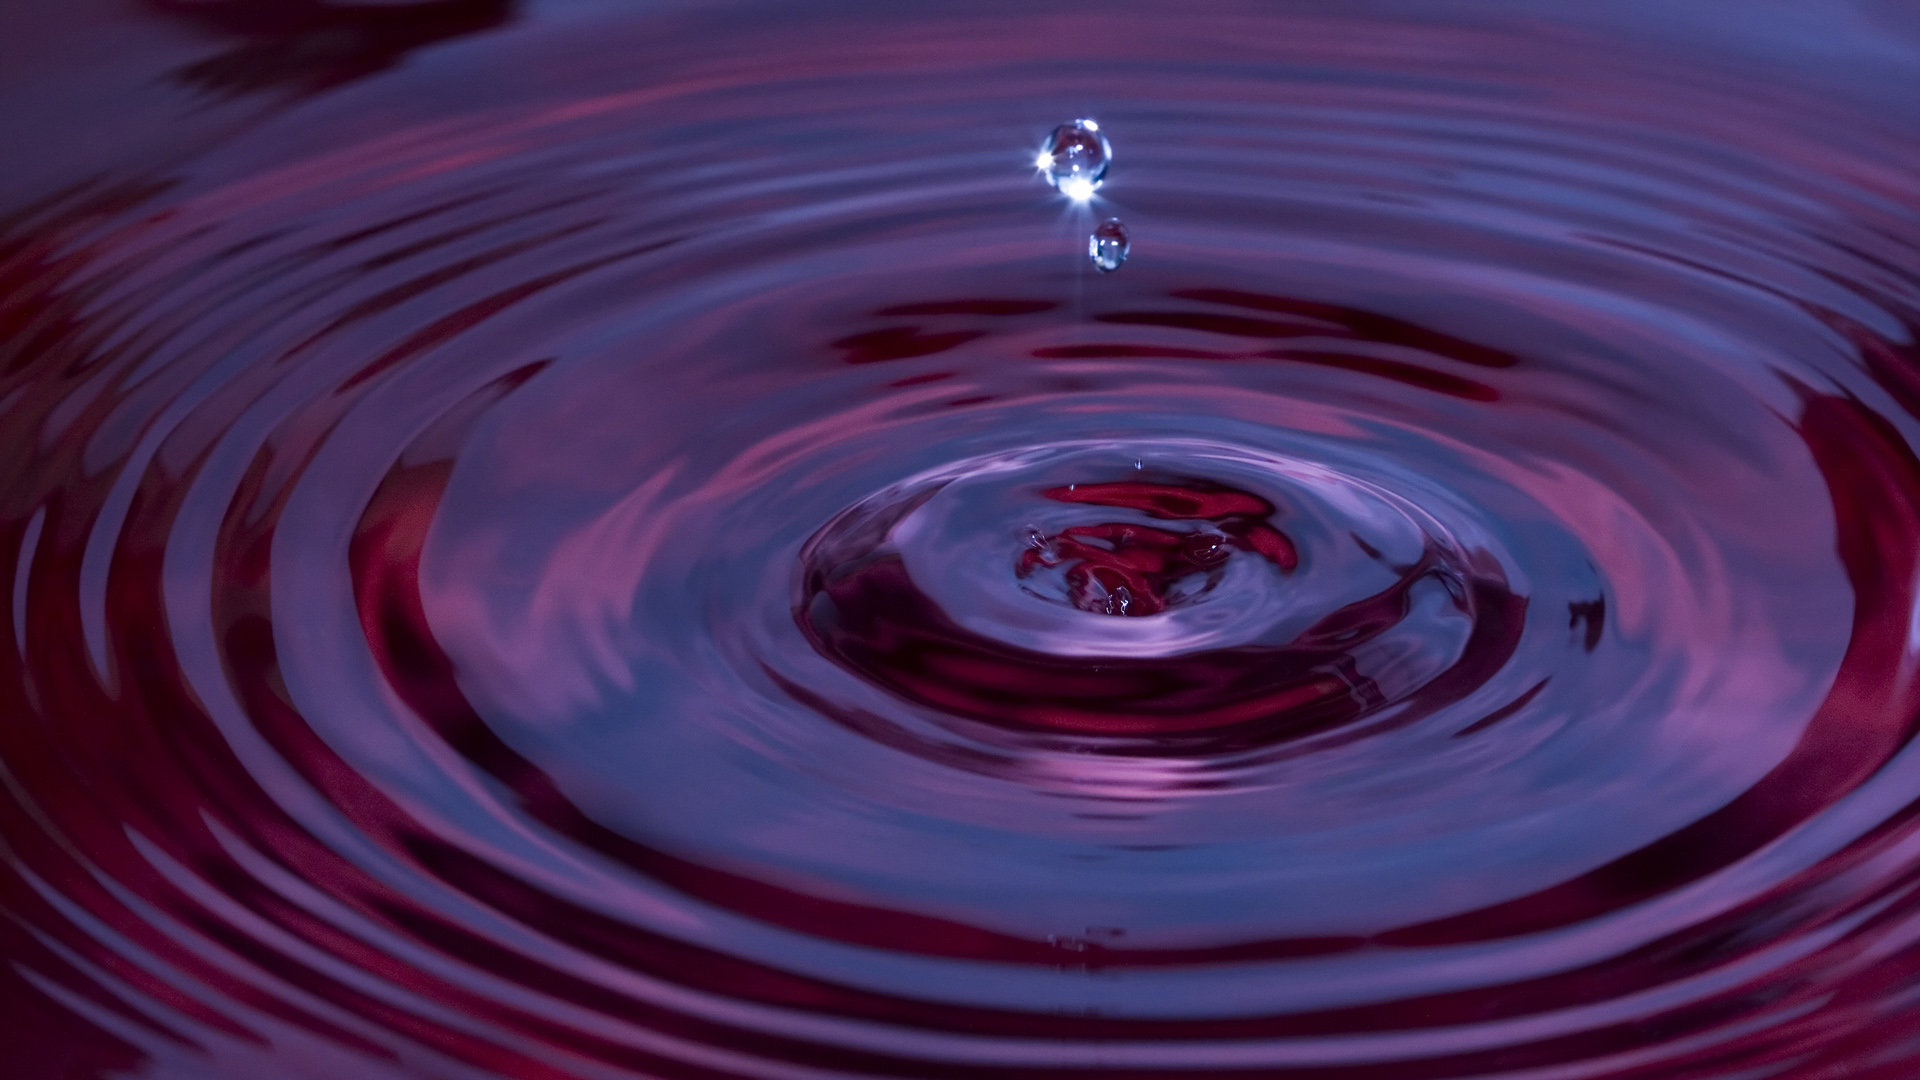 Download Full Hd 1080p Water Drop Pc Wallpaper Id430585 For Free